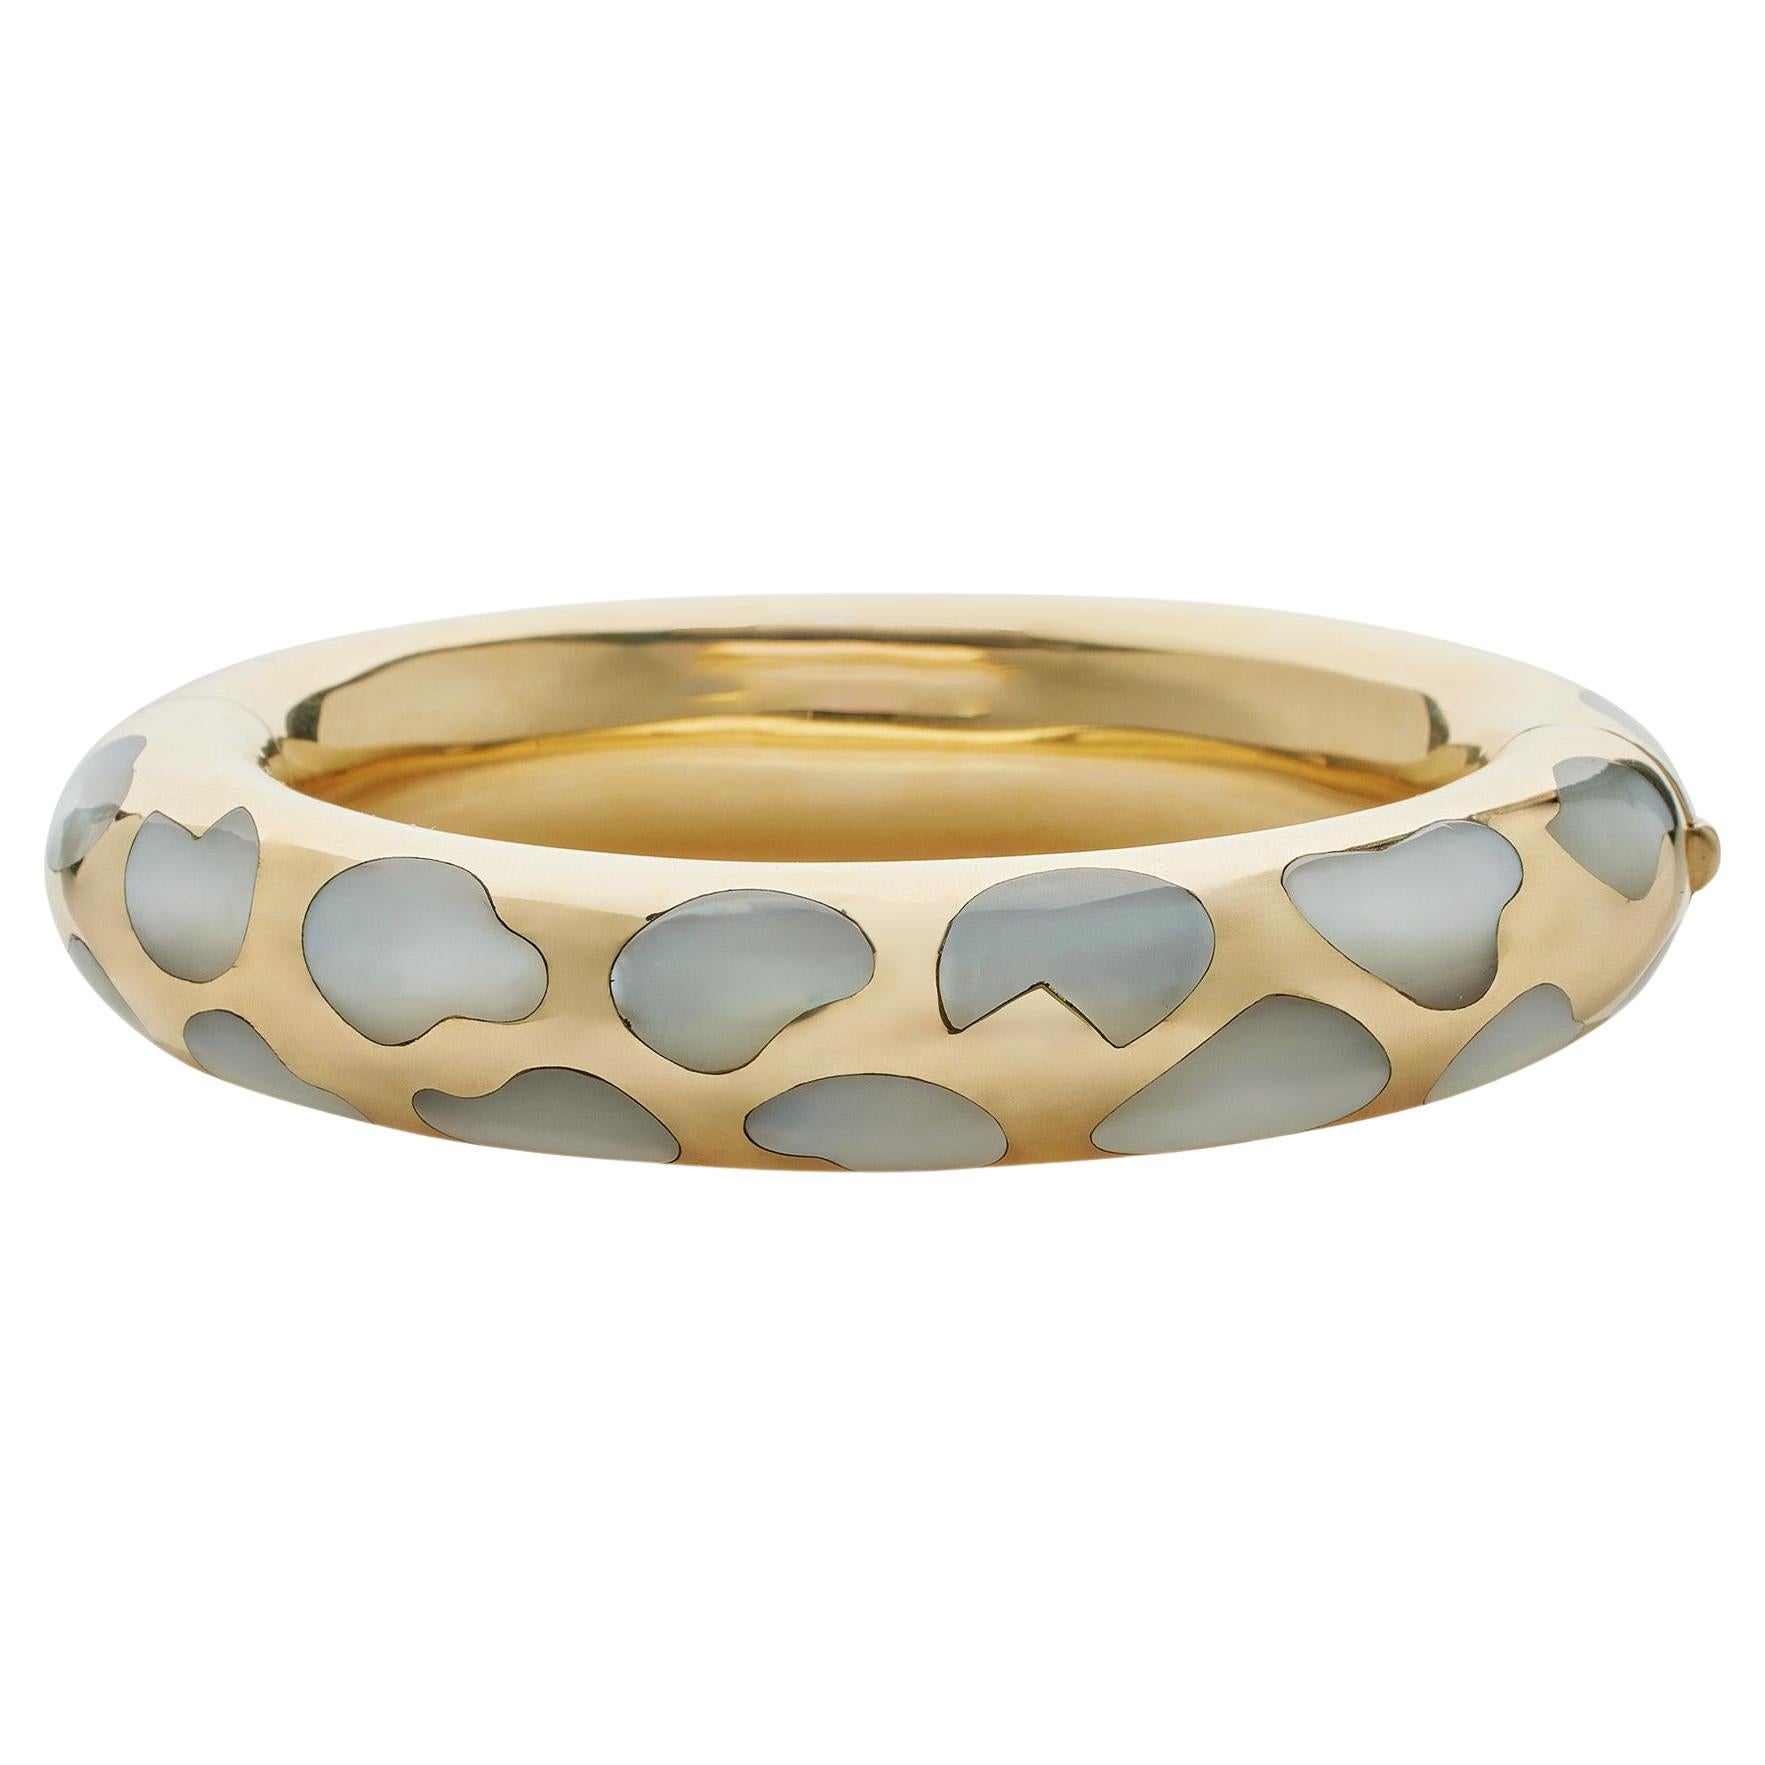 Angela Cummings Tiffany & Co. Mother-of-Pearl and 18K Gold Bangle Bracelet For Sale